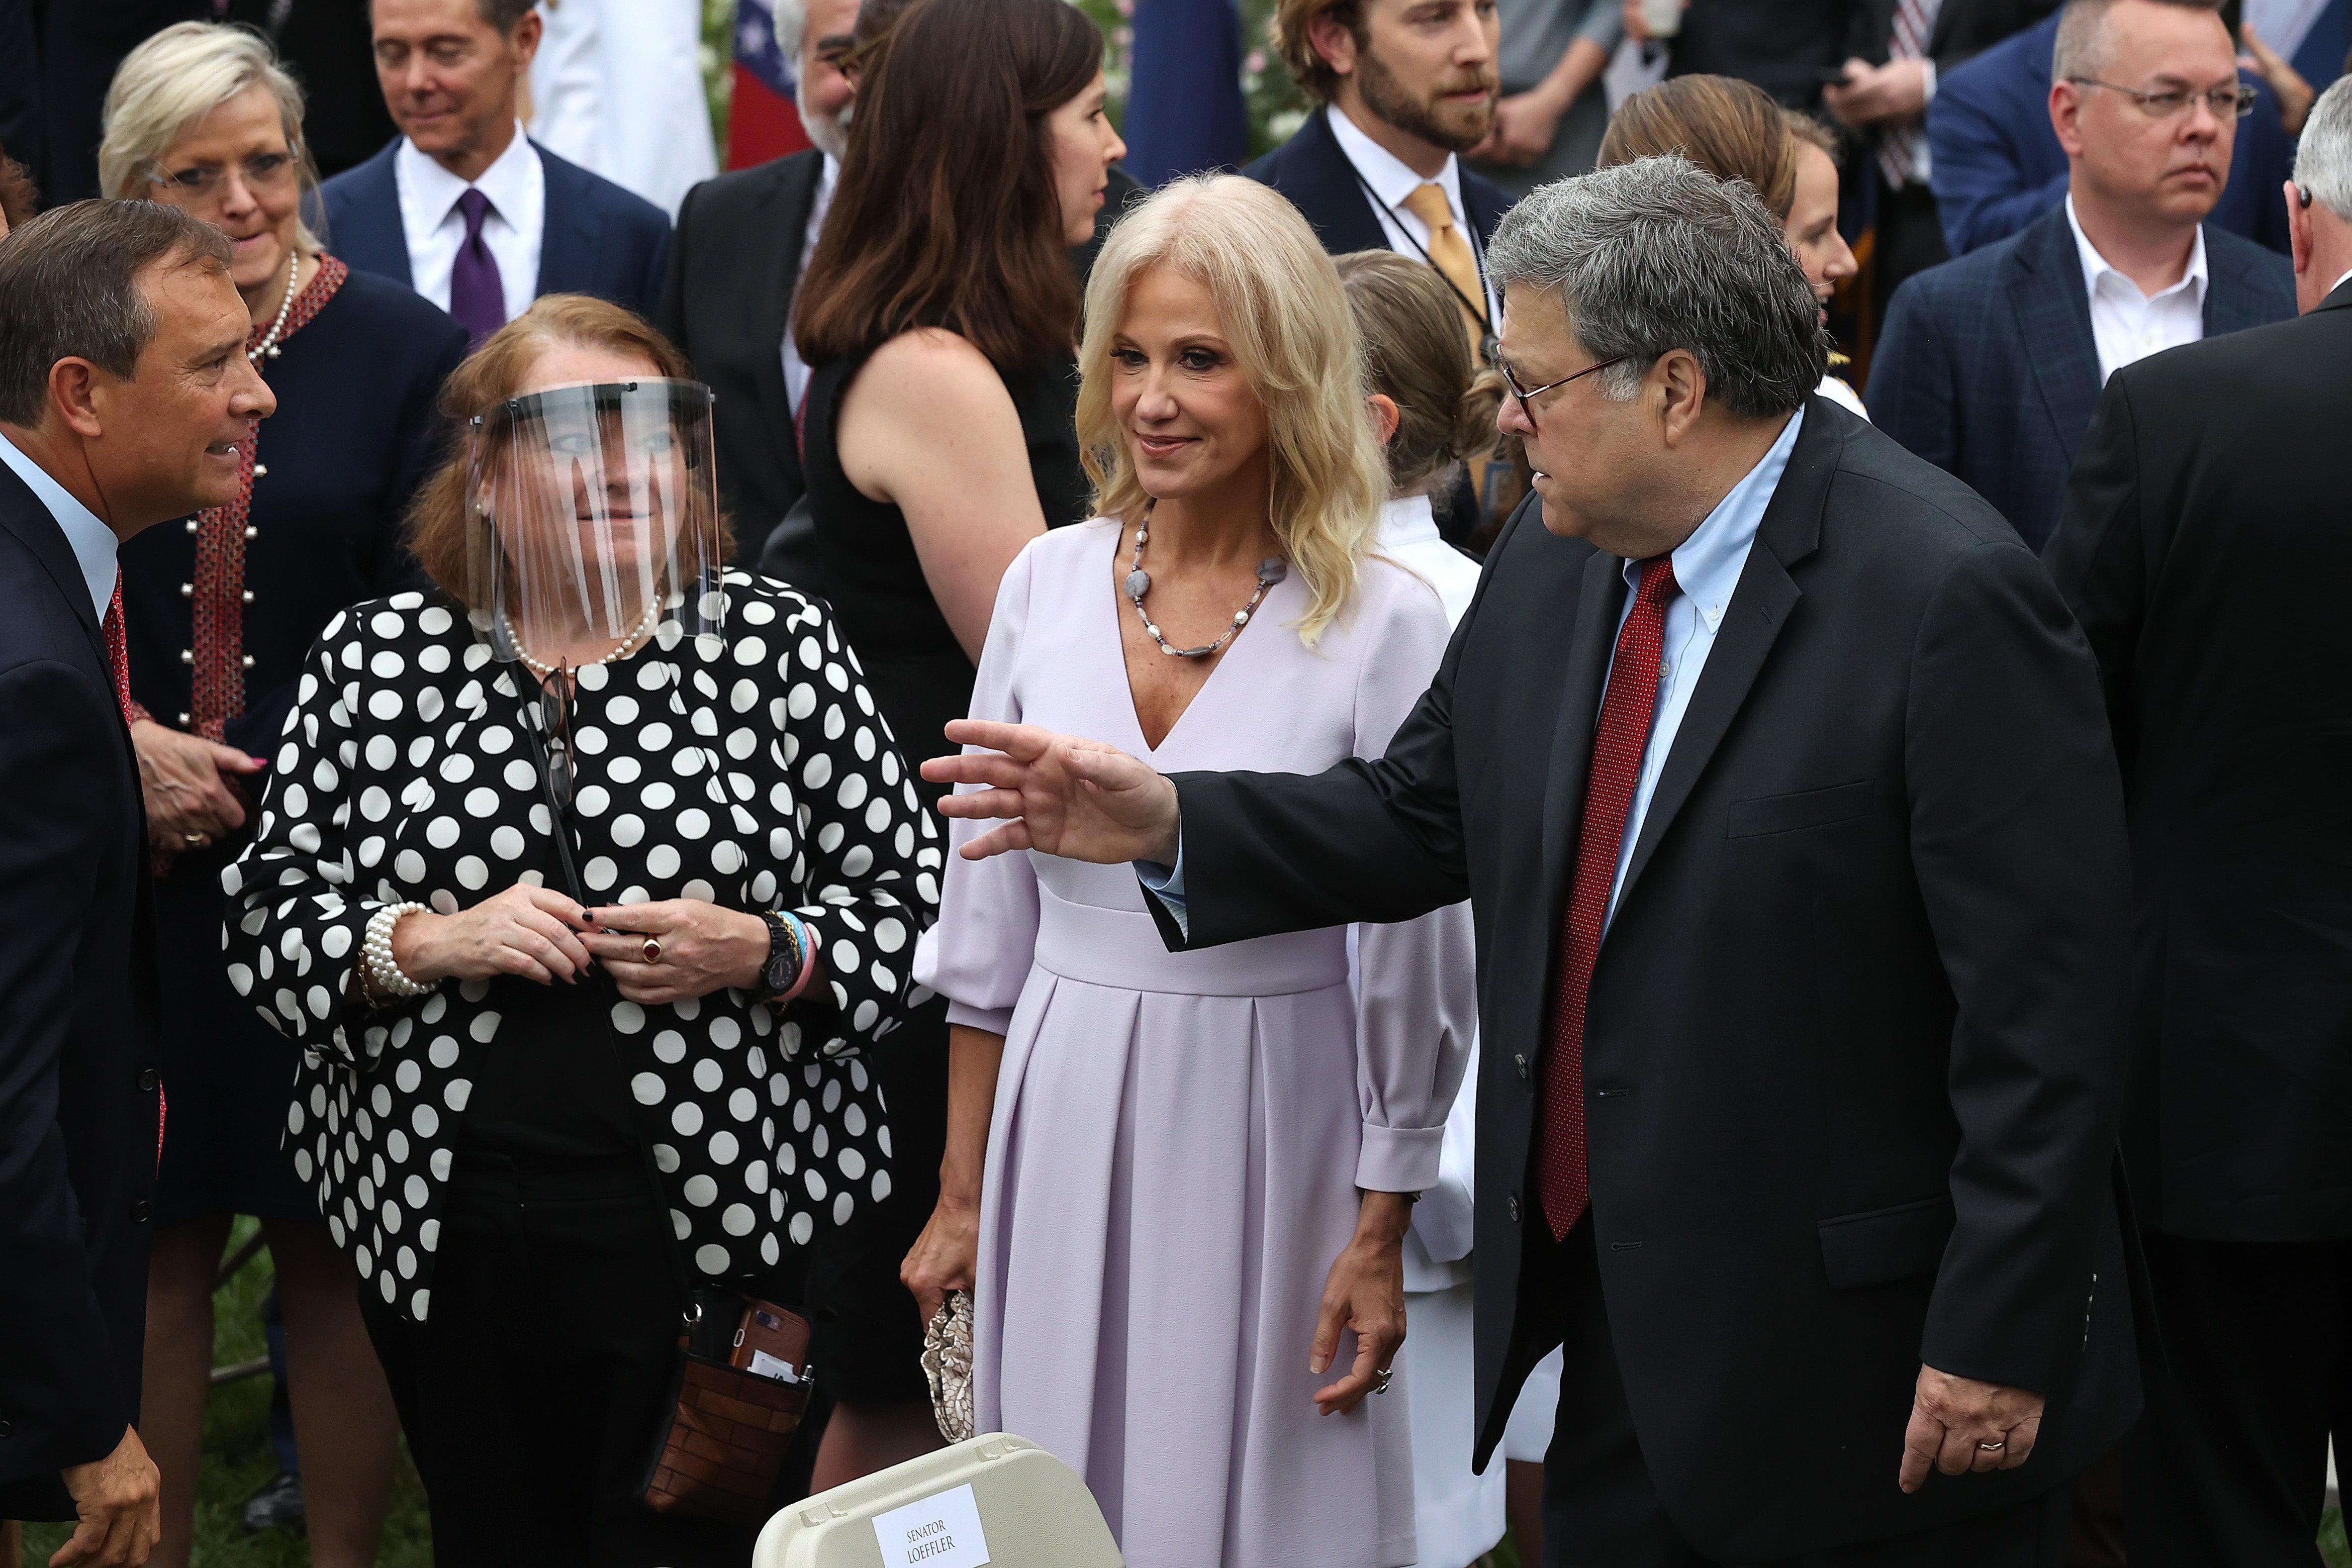 Kellyanne Conway and Attorney General William Barr talk with guests in the Rose Garden after President Donald Trump introduced Judge Amy Coney Barrett as his nominee to the Supreme Court